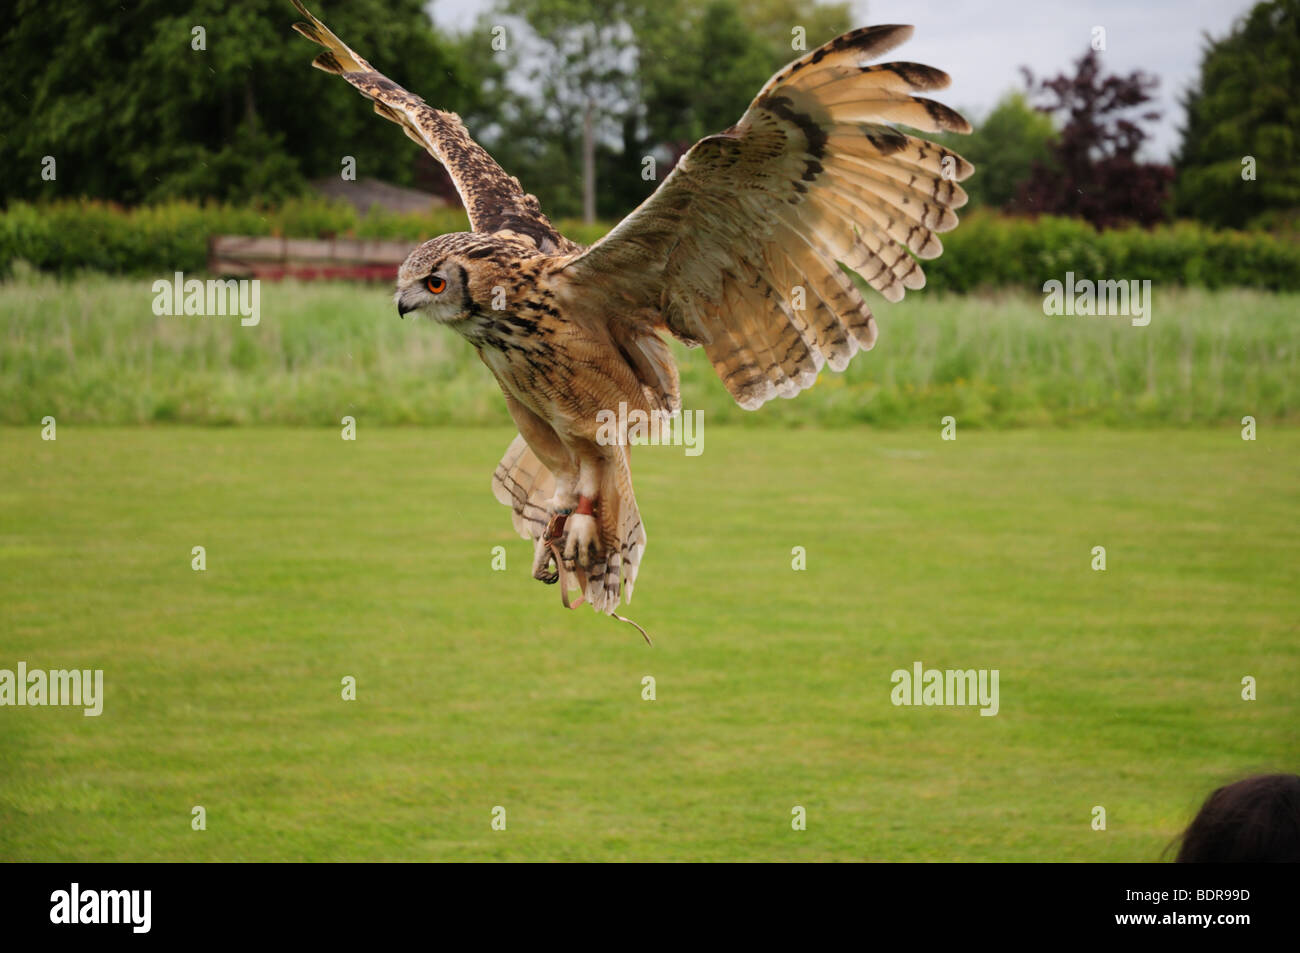 Eagle Owl Swooping Stock Photo